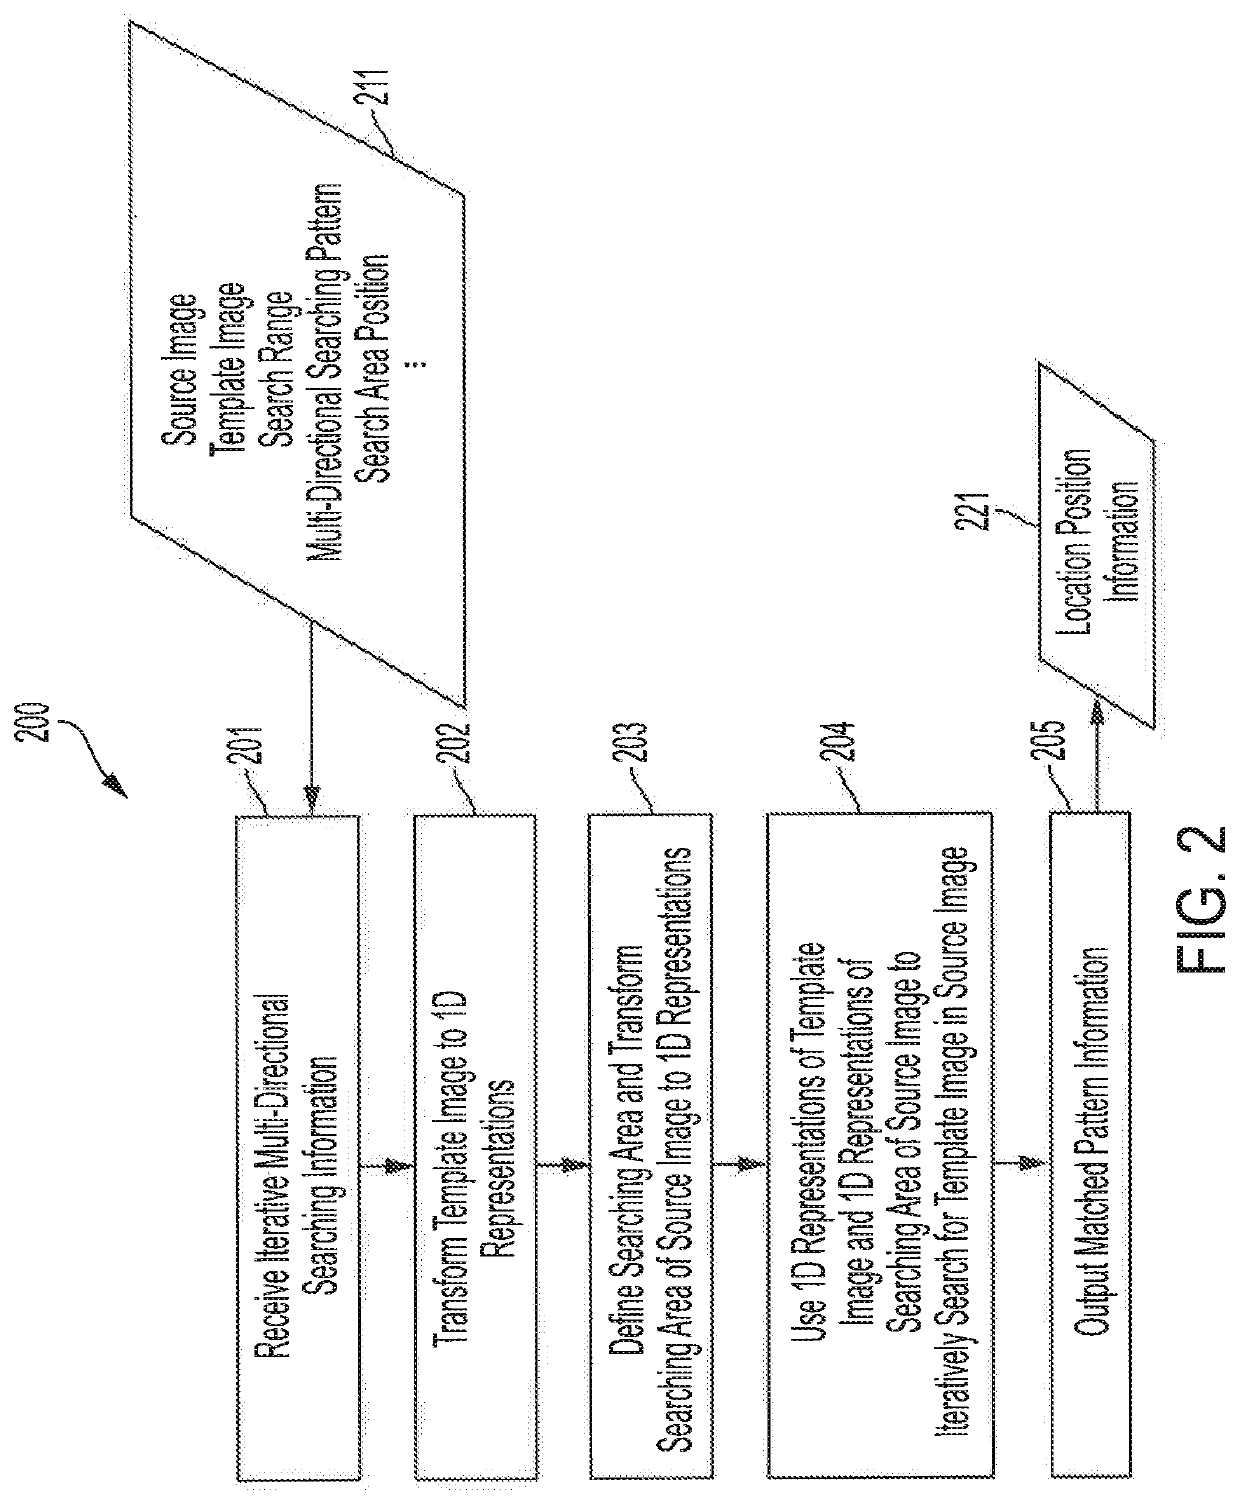 Iterative multi-directional image search supporting large template matching